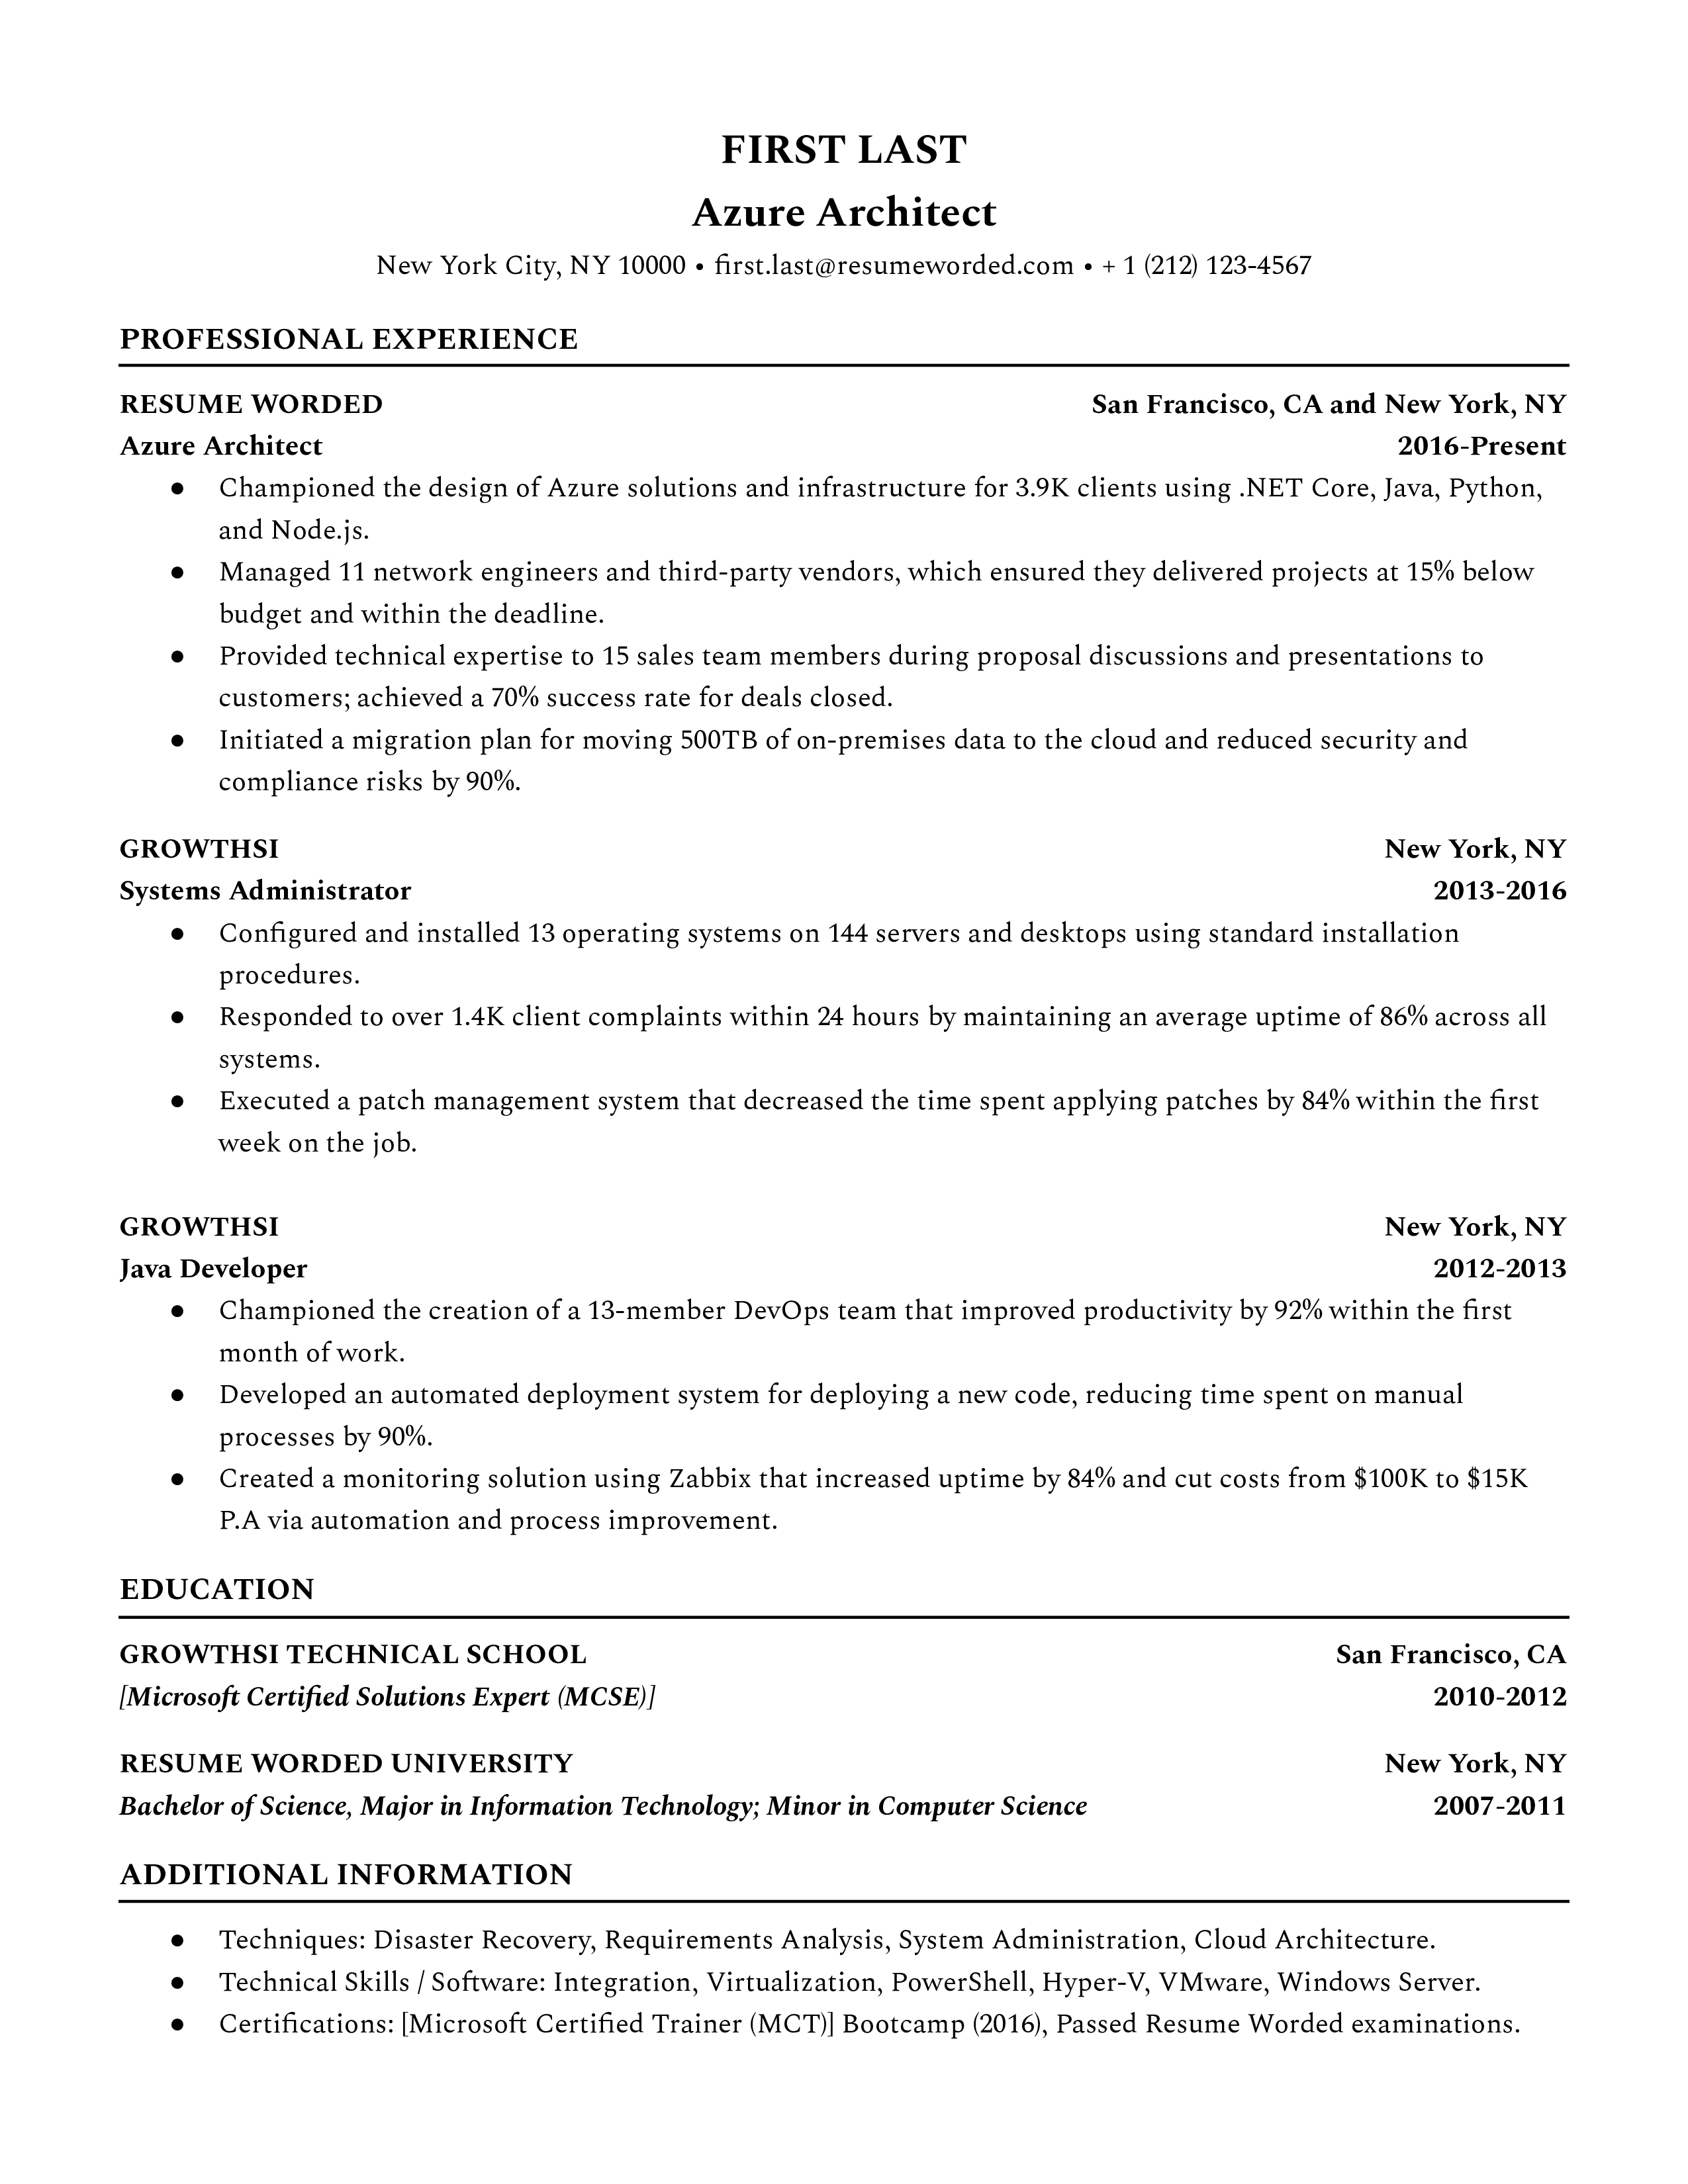 An azure architect resume template with a simplified structure